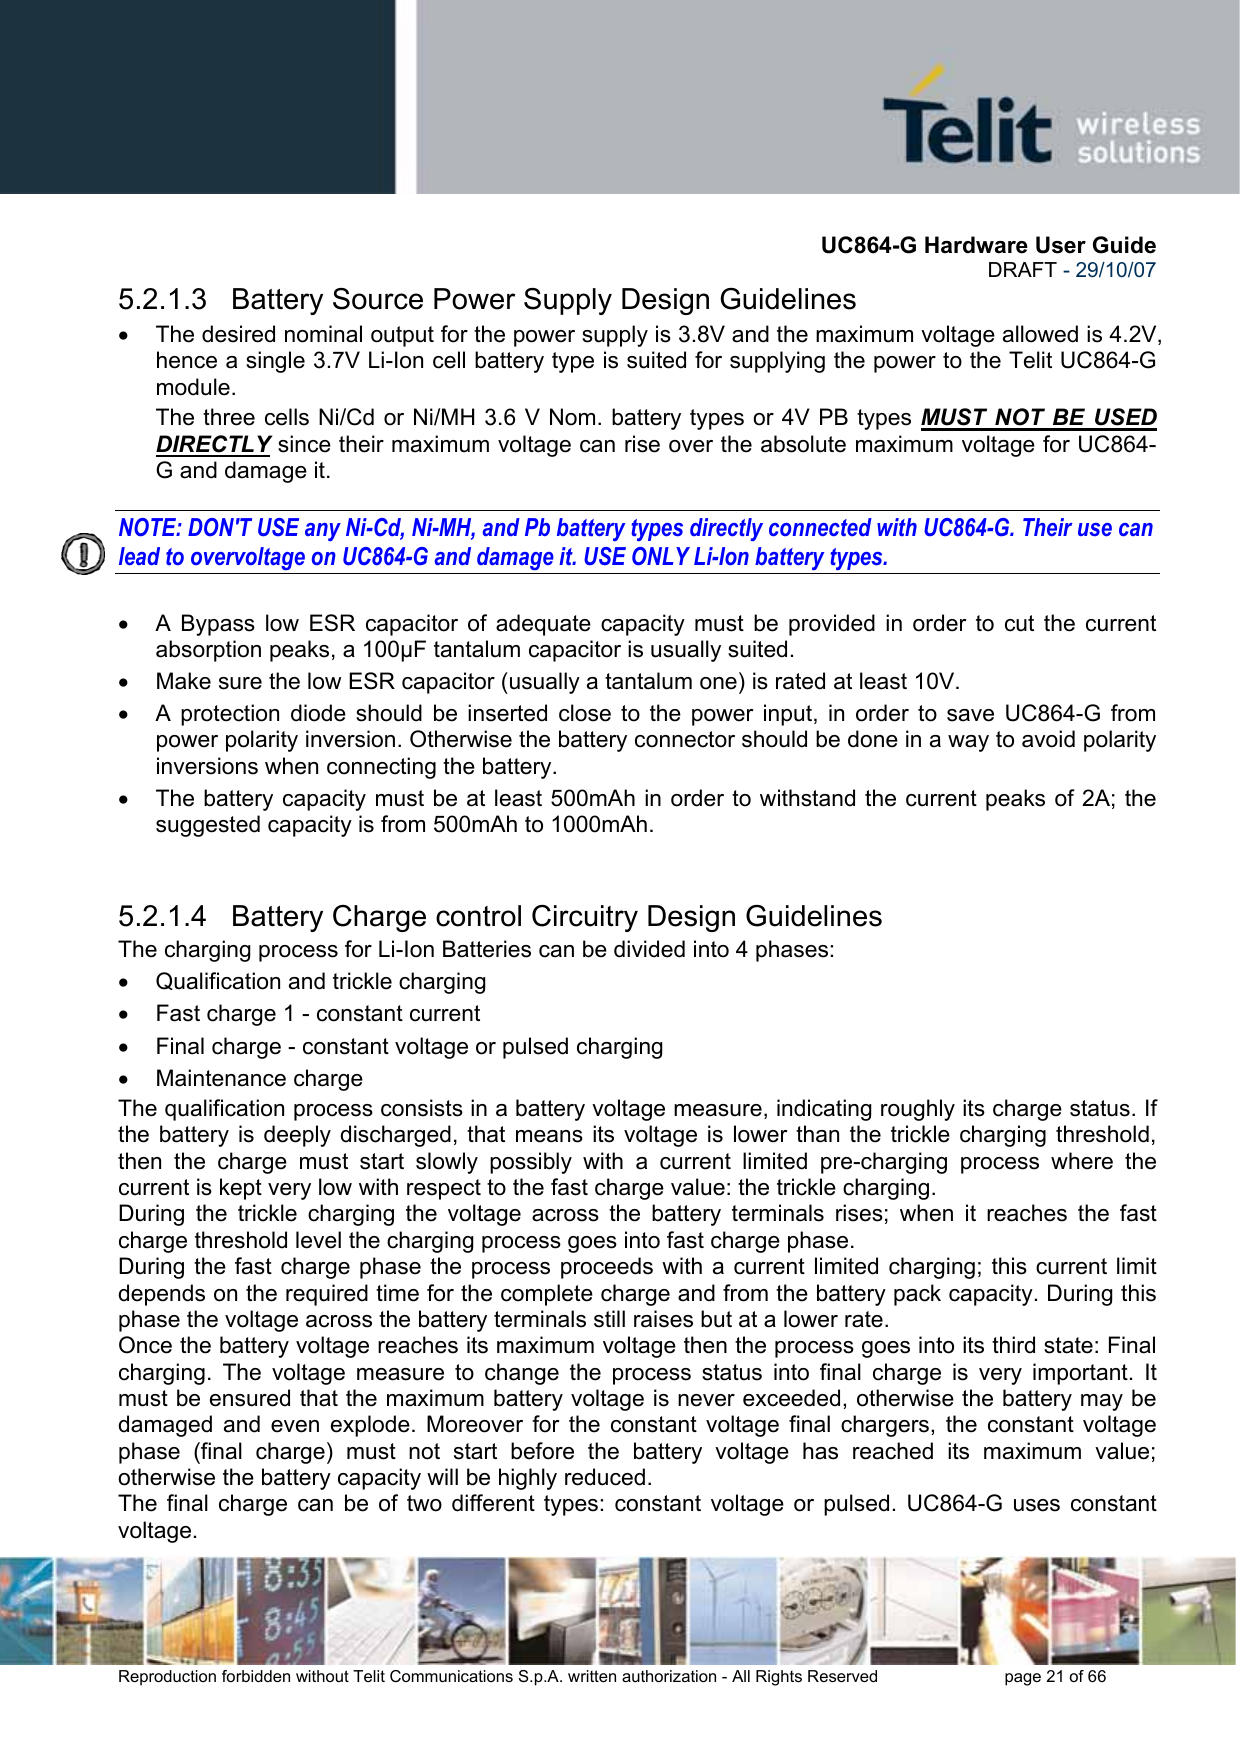       UC864-G Hardware User Guide  DRAFT - 29/10/07      Reproduction forbidden without Telit Communications S.p.A. written authorization - All Rights Reserved    page 21 of 66  5.2.1.3   Battery Source Power Supply Design Guidelines •  The desired nominal output for the power supply is 3.8V and the maximum voltage allowed is 4.2V, hence a single 3.7V Li-Ion cell battery type is suited for supplying the power to the Telit UC864-G module. The three cells Ni/Cd or Ni/MH 3.6 V Nom. battery types or 4V PB types MUST NOT BE USED DIRECTLY since their maximum voltage can rise over the absolute maximum voltage for UC864-G and damage it.  NOTE: DON&apos;T USE any Ni-Cd, Ni-MH, and Pb battery types directly connected with UC864-G. Their use can lead to overvoltage on UC864-G and damage it. USE ONLY Li-Ion battery types.  •  A Bypass low ESR capacitor of adequate capacity must be provided in order to cut the current absorption peaks, a 100µF tantalum capacitor is usually suited. •  Make sure the low ESR capacitor (usually a tantalum one) is rated at least 10V. •  A protection diode should be inserted close to the power input, in order to save UC864-G from power polarity inversion. Otherwise the battery connector should be done in a way to avoid polarity inversions when connecting the battery. •  The battery capacity must be at least 500mAh in order to withstand the current peaks of 2A; the suggested capacity is from 500mAh to 1000mAh.   5.2.1.4   Battery Charge control Circuitry Design Guidelines The charging process for Li-Ion Batteries can be divided into 4 phases: •  Qualification and trickle charging •  Fast charge 1 - constant current •  Final charge - constant voltage or pulsed charging •  Maintenance charge  The qualification process consists in a battery voltage measure, indicating roughly its charge status. If the battery is deeply discharged, that means its voltage is lower than the trickle charging threshold, then the charge must start slowly possibly with a current limited pre-charging process where the current is kept very low with respect to the fast charge value: the trickle charging. During the trickle charging the voltage across the battery terminals rises; when it reaches the fast charge threshold level the charging process goes into fast charge phase. During the fast charge phase the process proceeds with a current limited charging; this current limit depends on the required time for the complete charge and from the battery pack capacity. During this phase the voltage across the battery terminals still raises but at a lower rate. Once the battery voltage reaches its maximum voltage then the process goes into its third state: Final charging. The voltage measure to change the process status into final charge is very important. It must be ensured that the maximum battery voltage is never exceeded, otherwise the battery may be damaged and even explode. Moreover for the constant voltage final chargers, the constant voltage phase (final charge) must not start before the battery voltage has reached its maximum value; otherwise the battery capacity will be highly reduced. The final charge can be of two different types: constant voltage or pulsed. UC864-G uses constant voltage. 